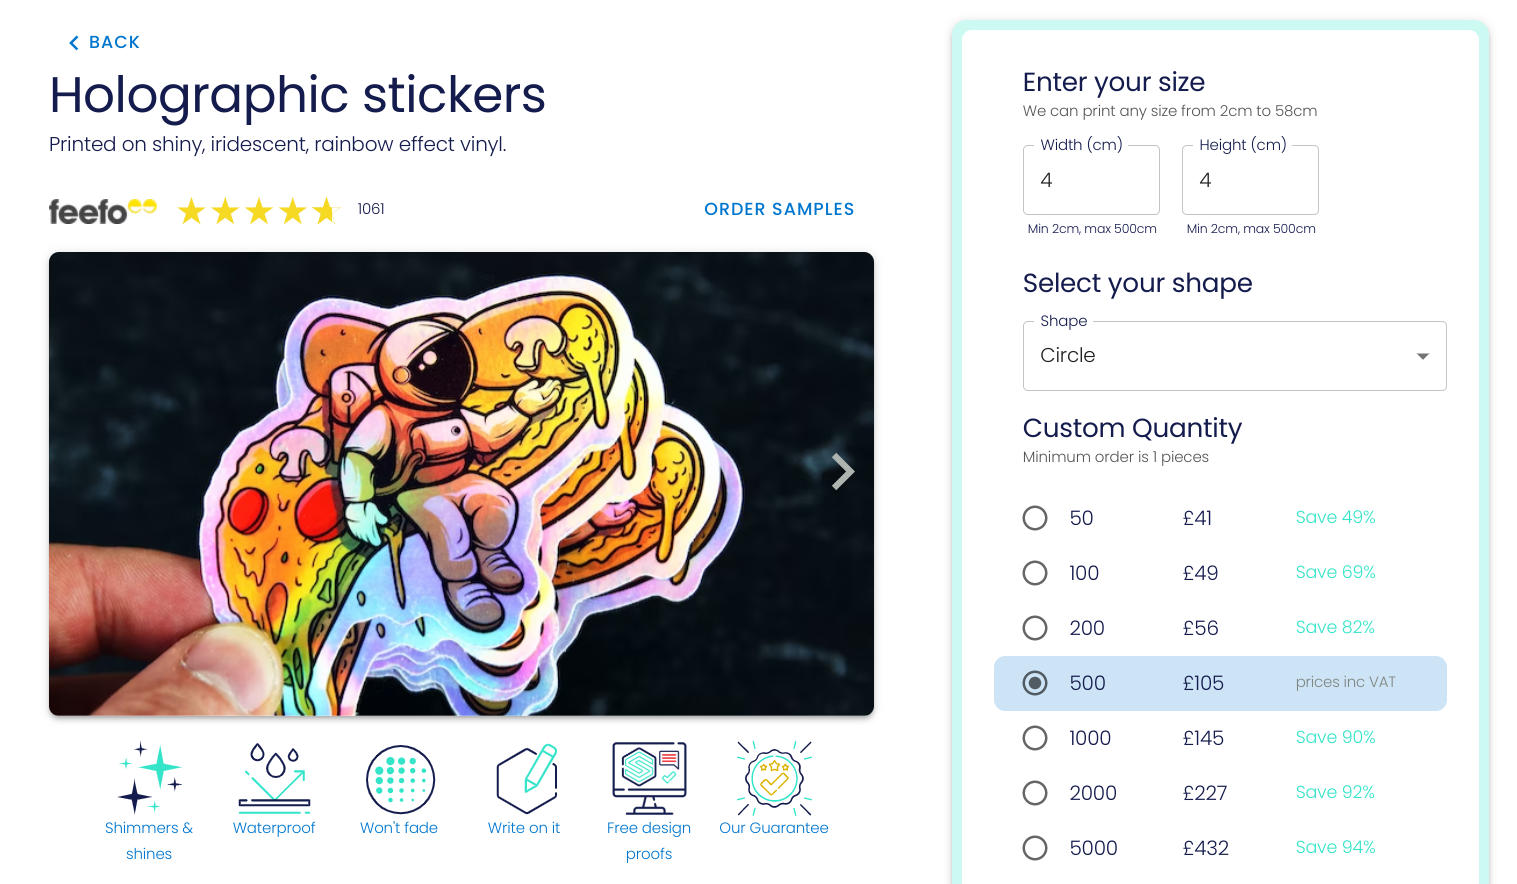 Screenshot of the holographic stickers page to explain the ordering process